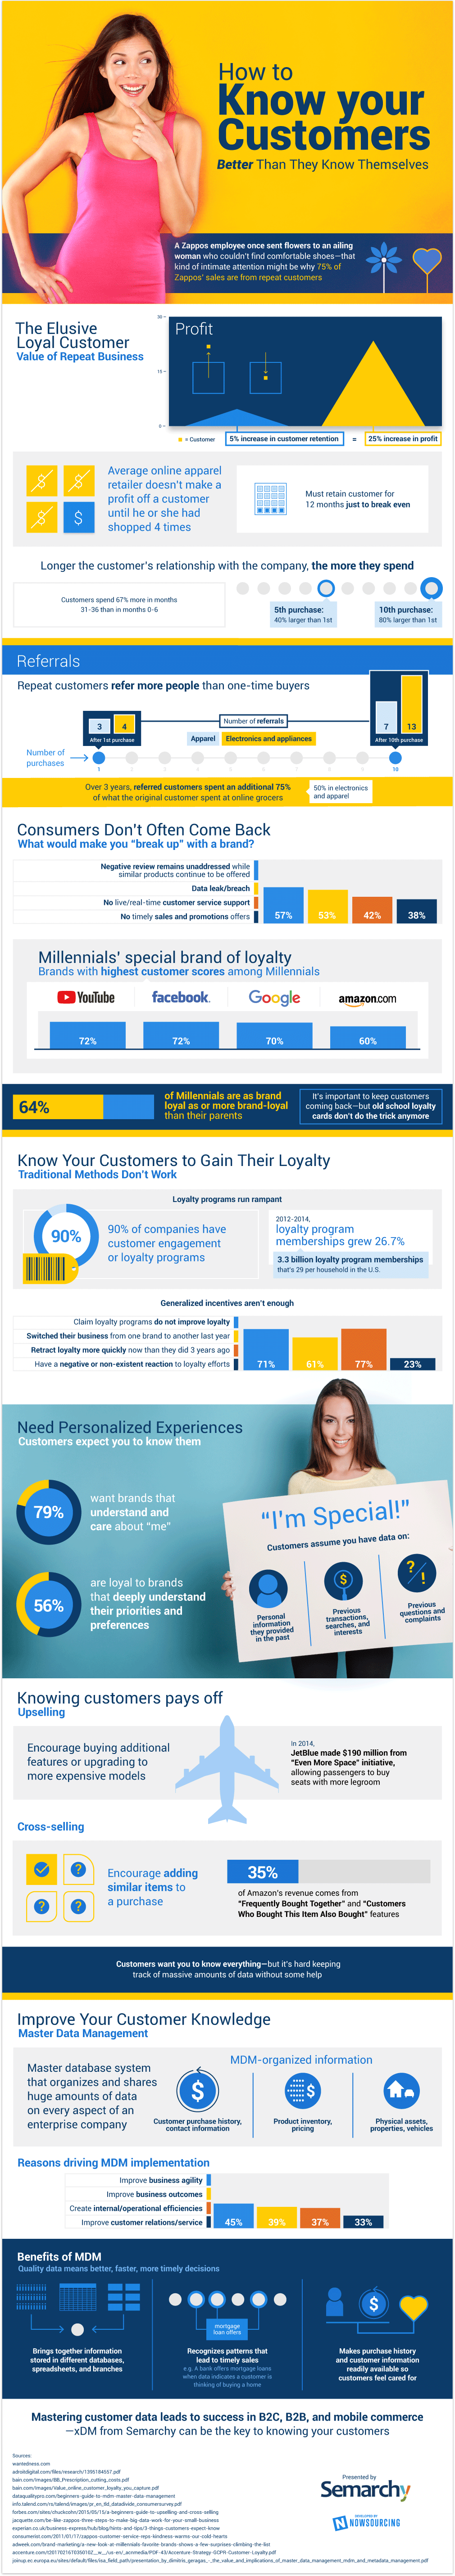 Featured Content - Customer Loyalty Statistics Infographic 